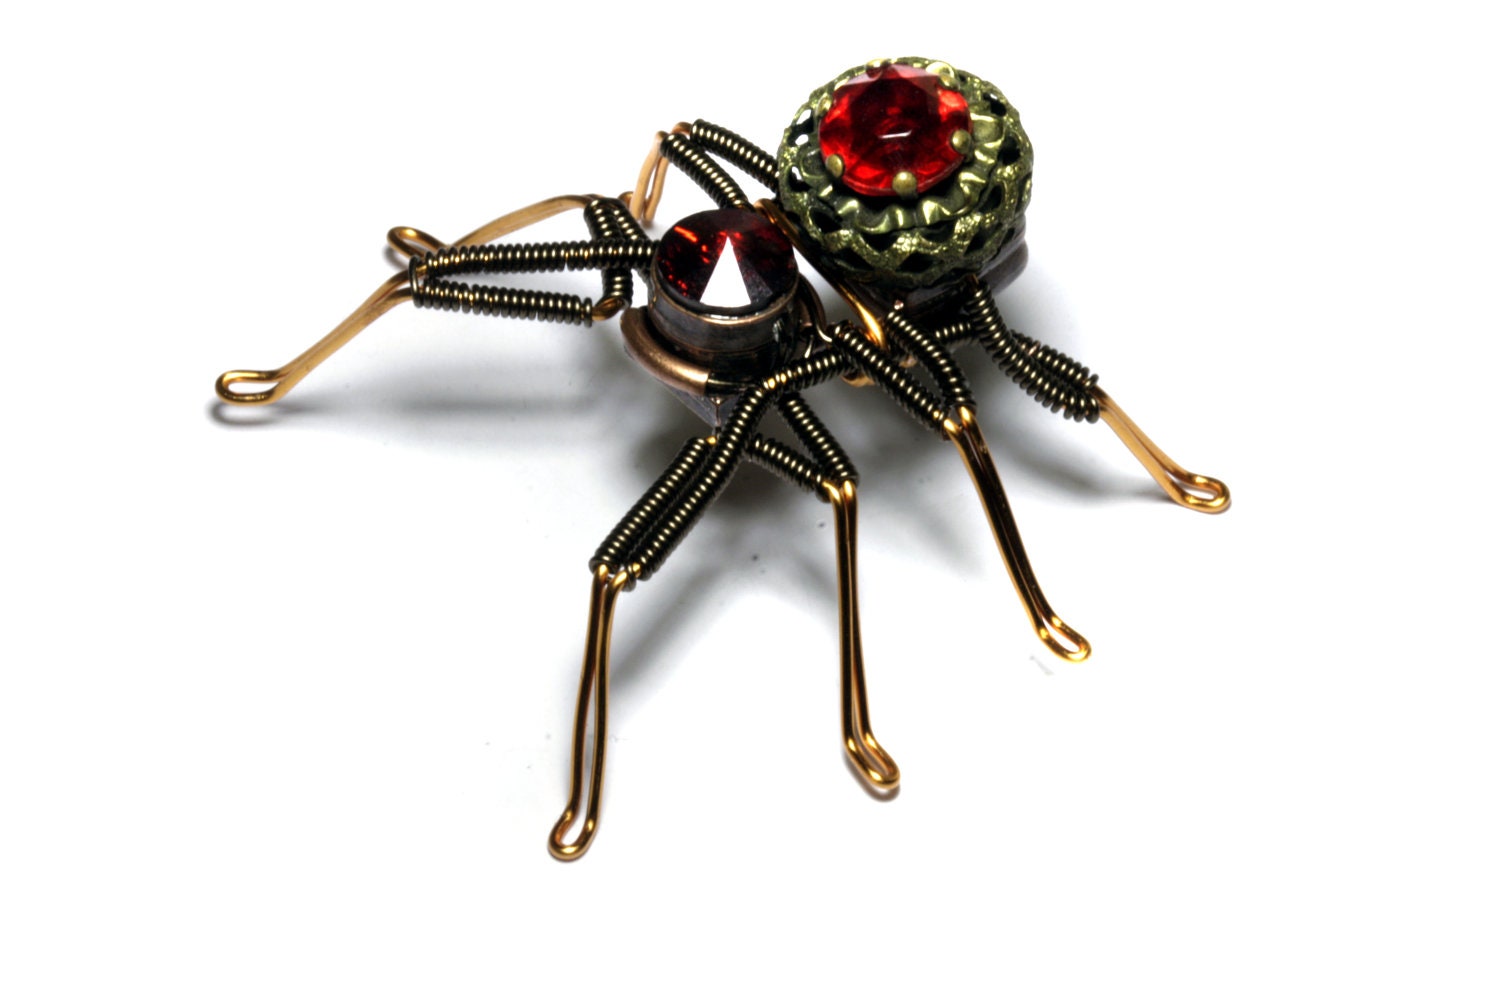 Steampunk Spider Lapel pin Sculpture with Ornate Antique Filigree Brass Jewel button with Ruby Red Stone Circa 1900